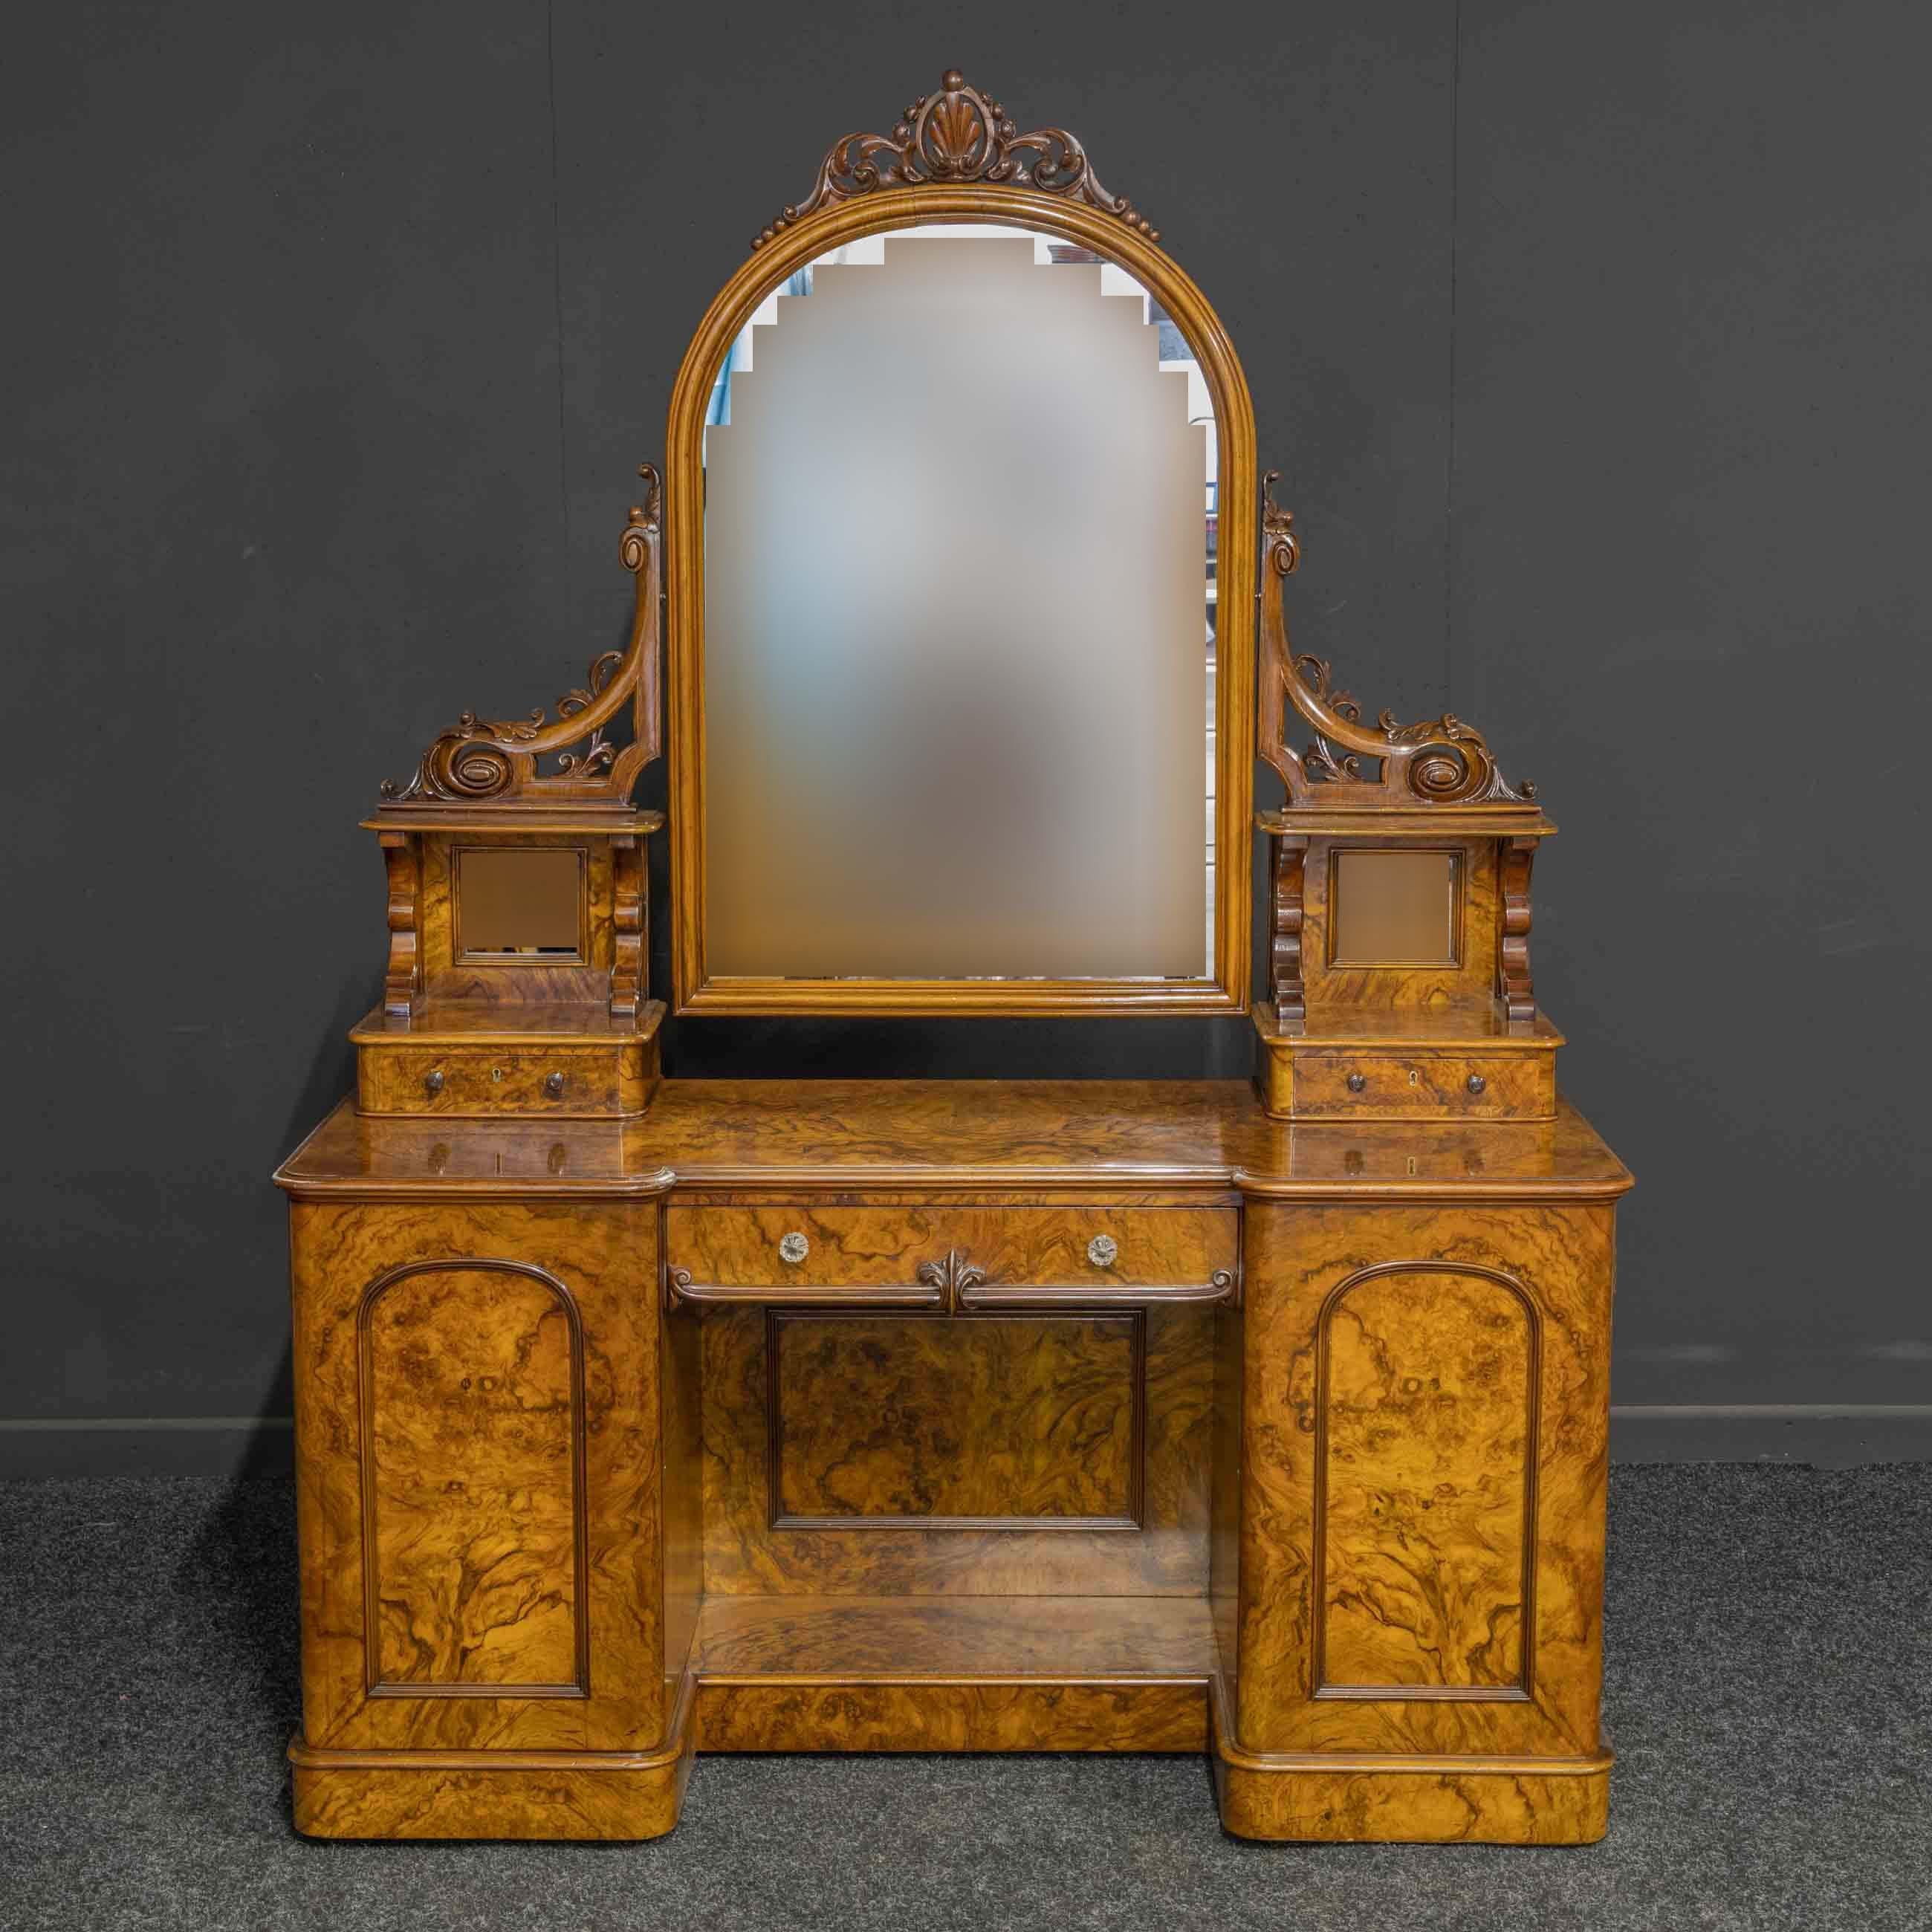 A superb mid Victorian burr walnut veneered dressing table of the highest quality. The two end cupboards open to reveal four solid mahogany drawers with recessed turned knobs. Both cupboards with locks and keys. The upper section has a pair of lined